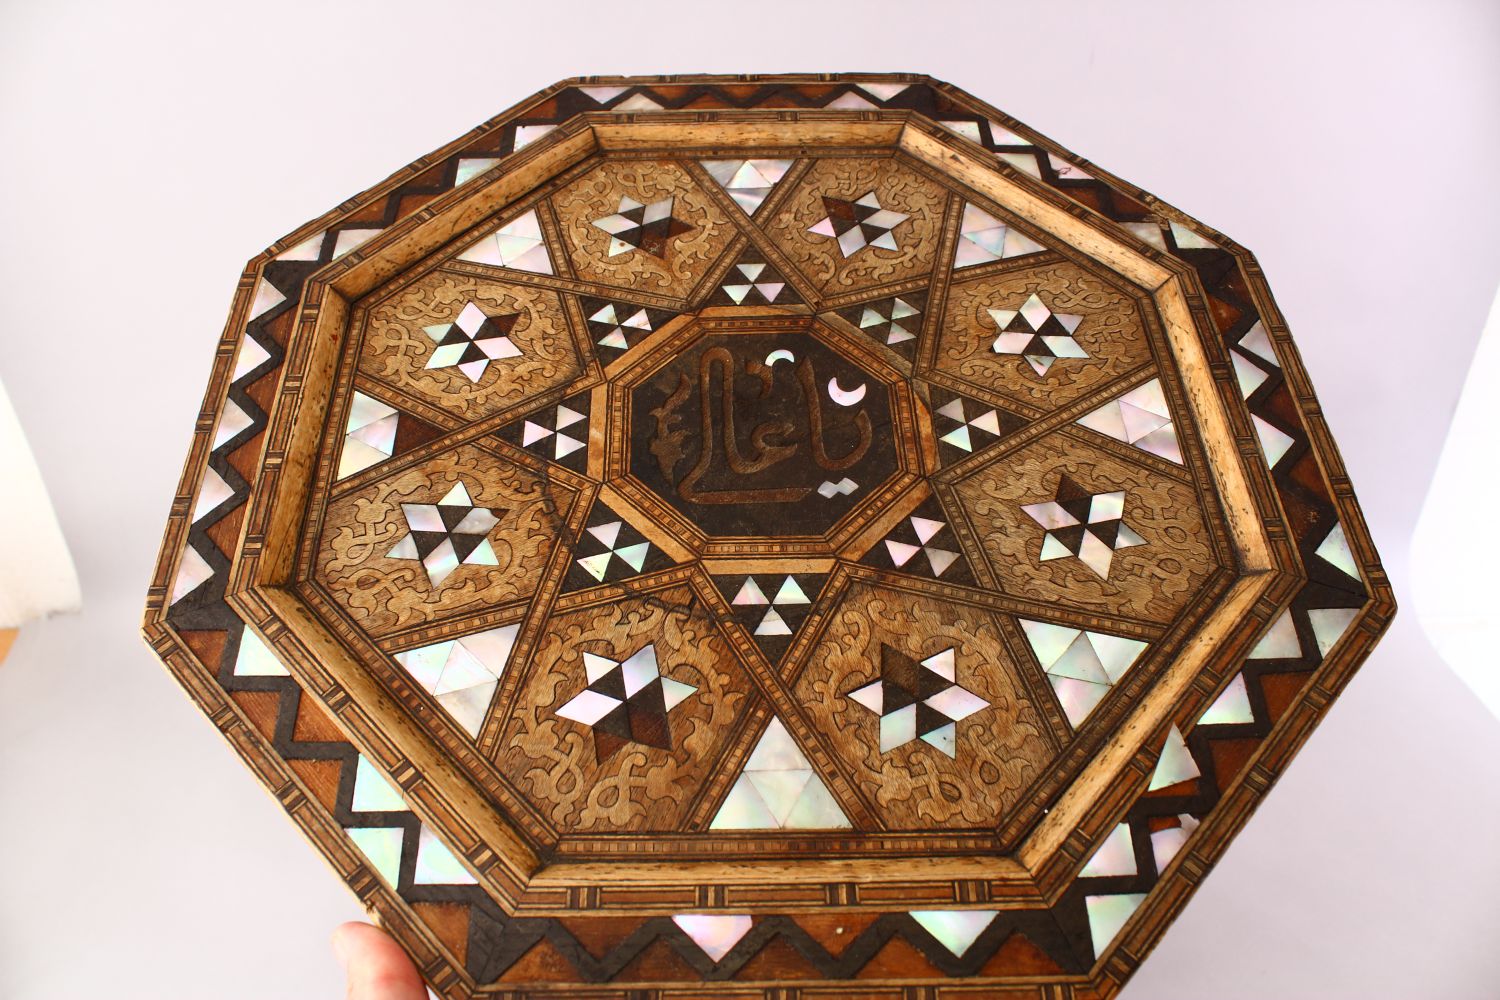 A FINE 19TH CENTURY TURKISH OTTOMAN MOTHER OF PEARL INLAID OCTAGONAL WOODEN TABLE, The top with - Image 2 of 6